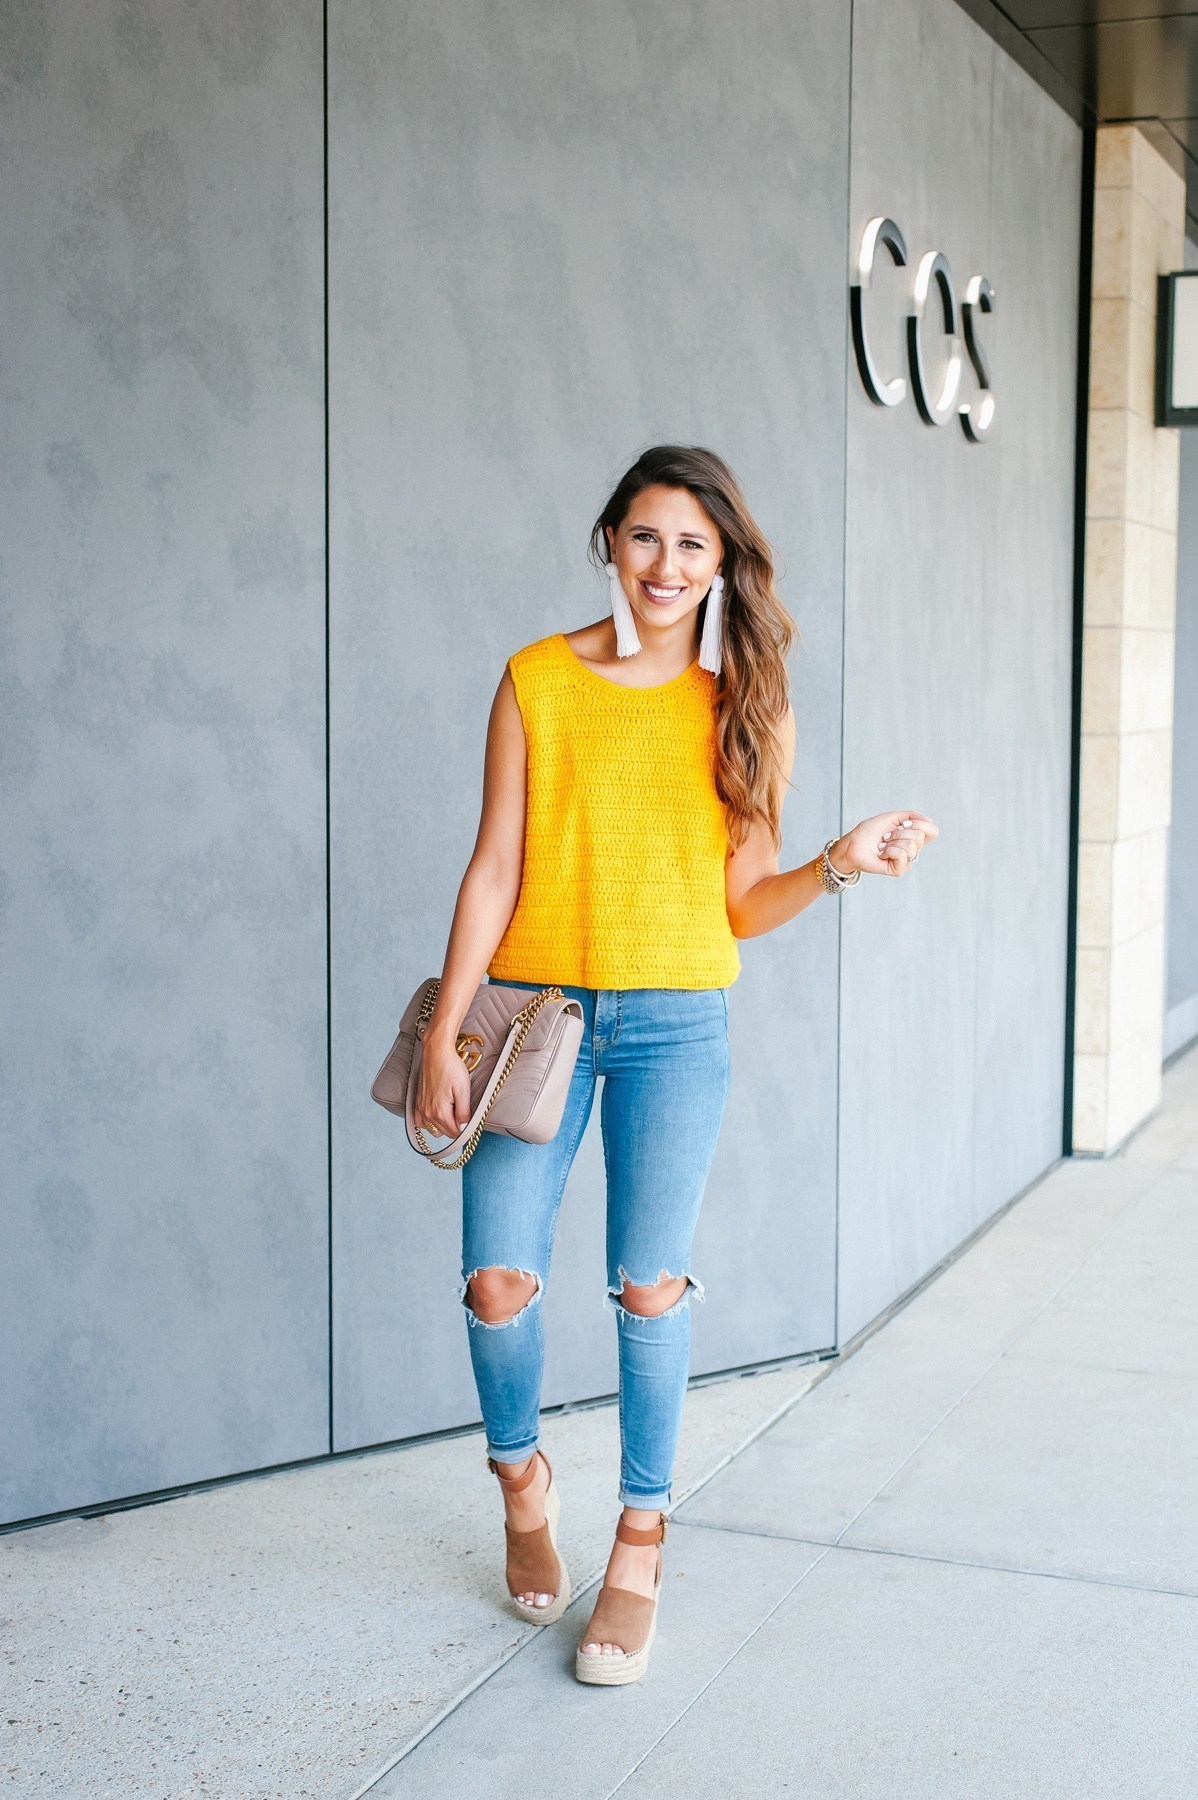 Women's Yellow Knit Sleeveless Top, Light Blue Ripped Skinny Jeans, Brown  Suede Wedge Sandals, Beige Quilted Leather Satchel Bag | Lookastic